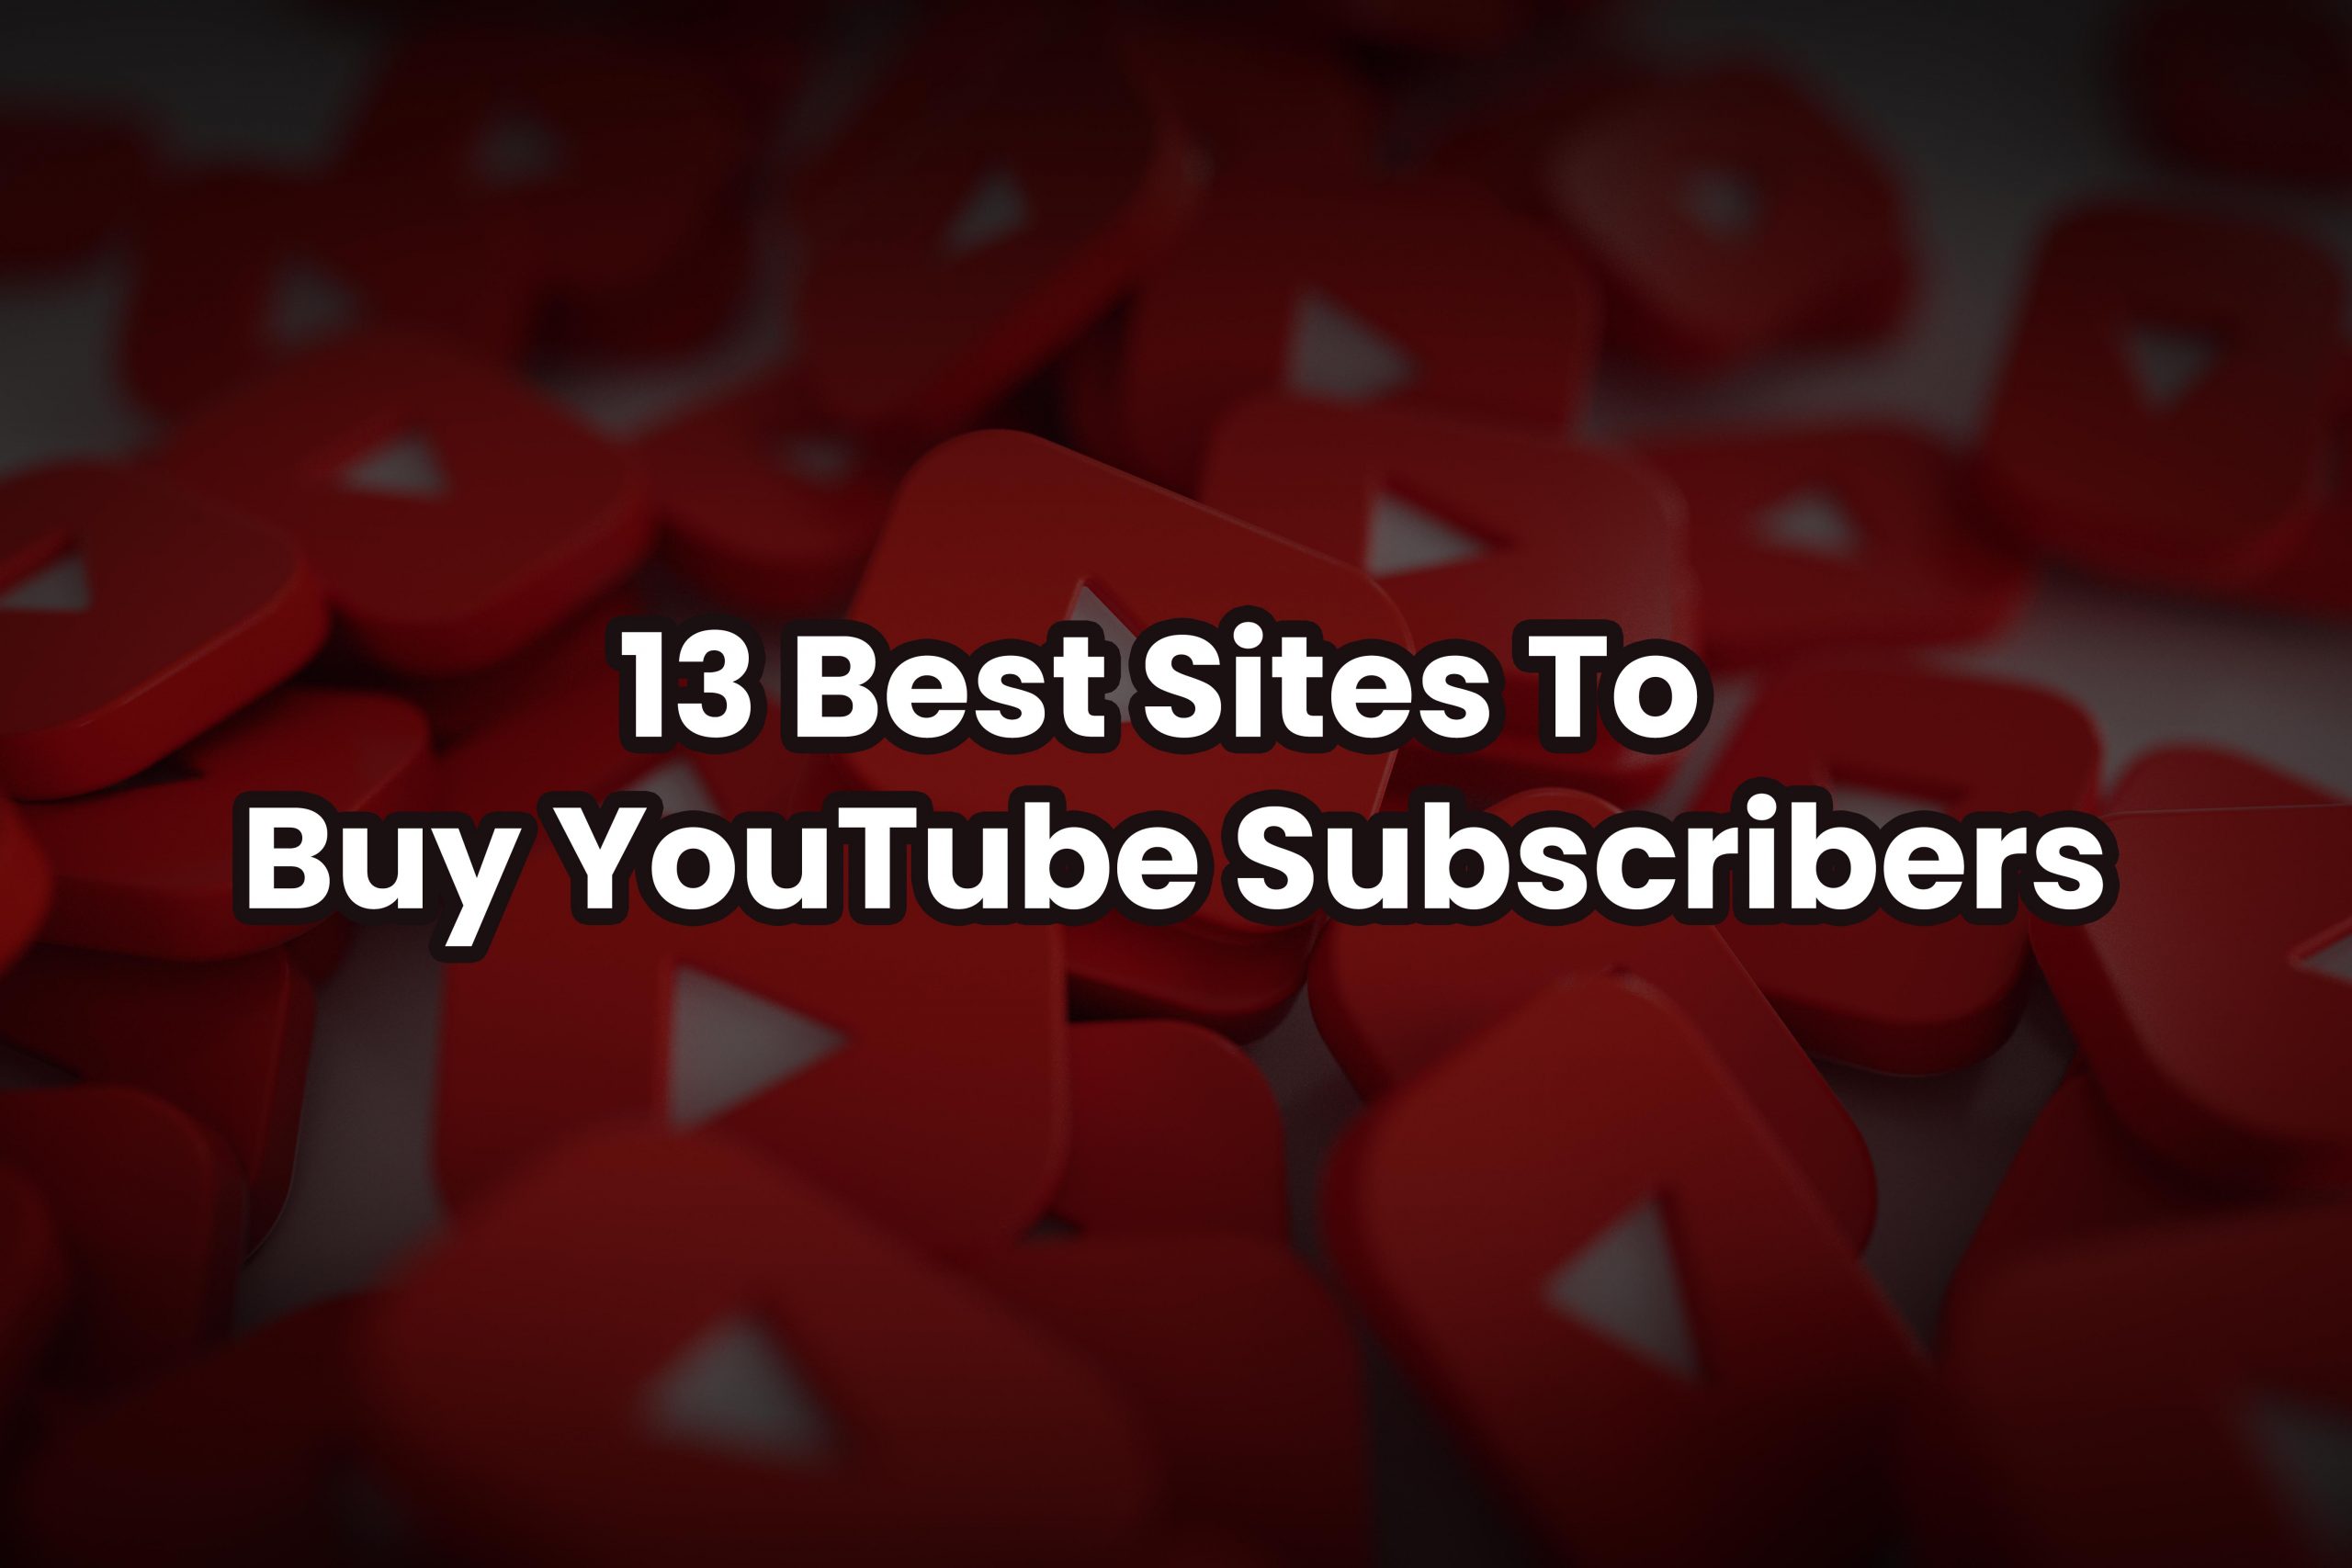 13 Best Sites To Buy YouTube Subscribers